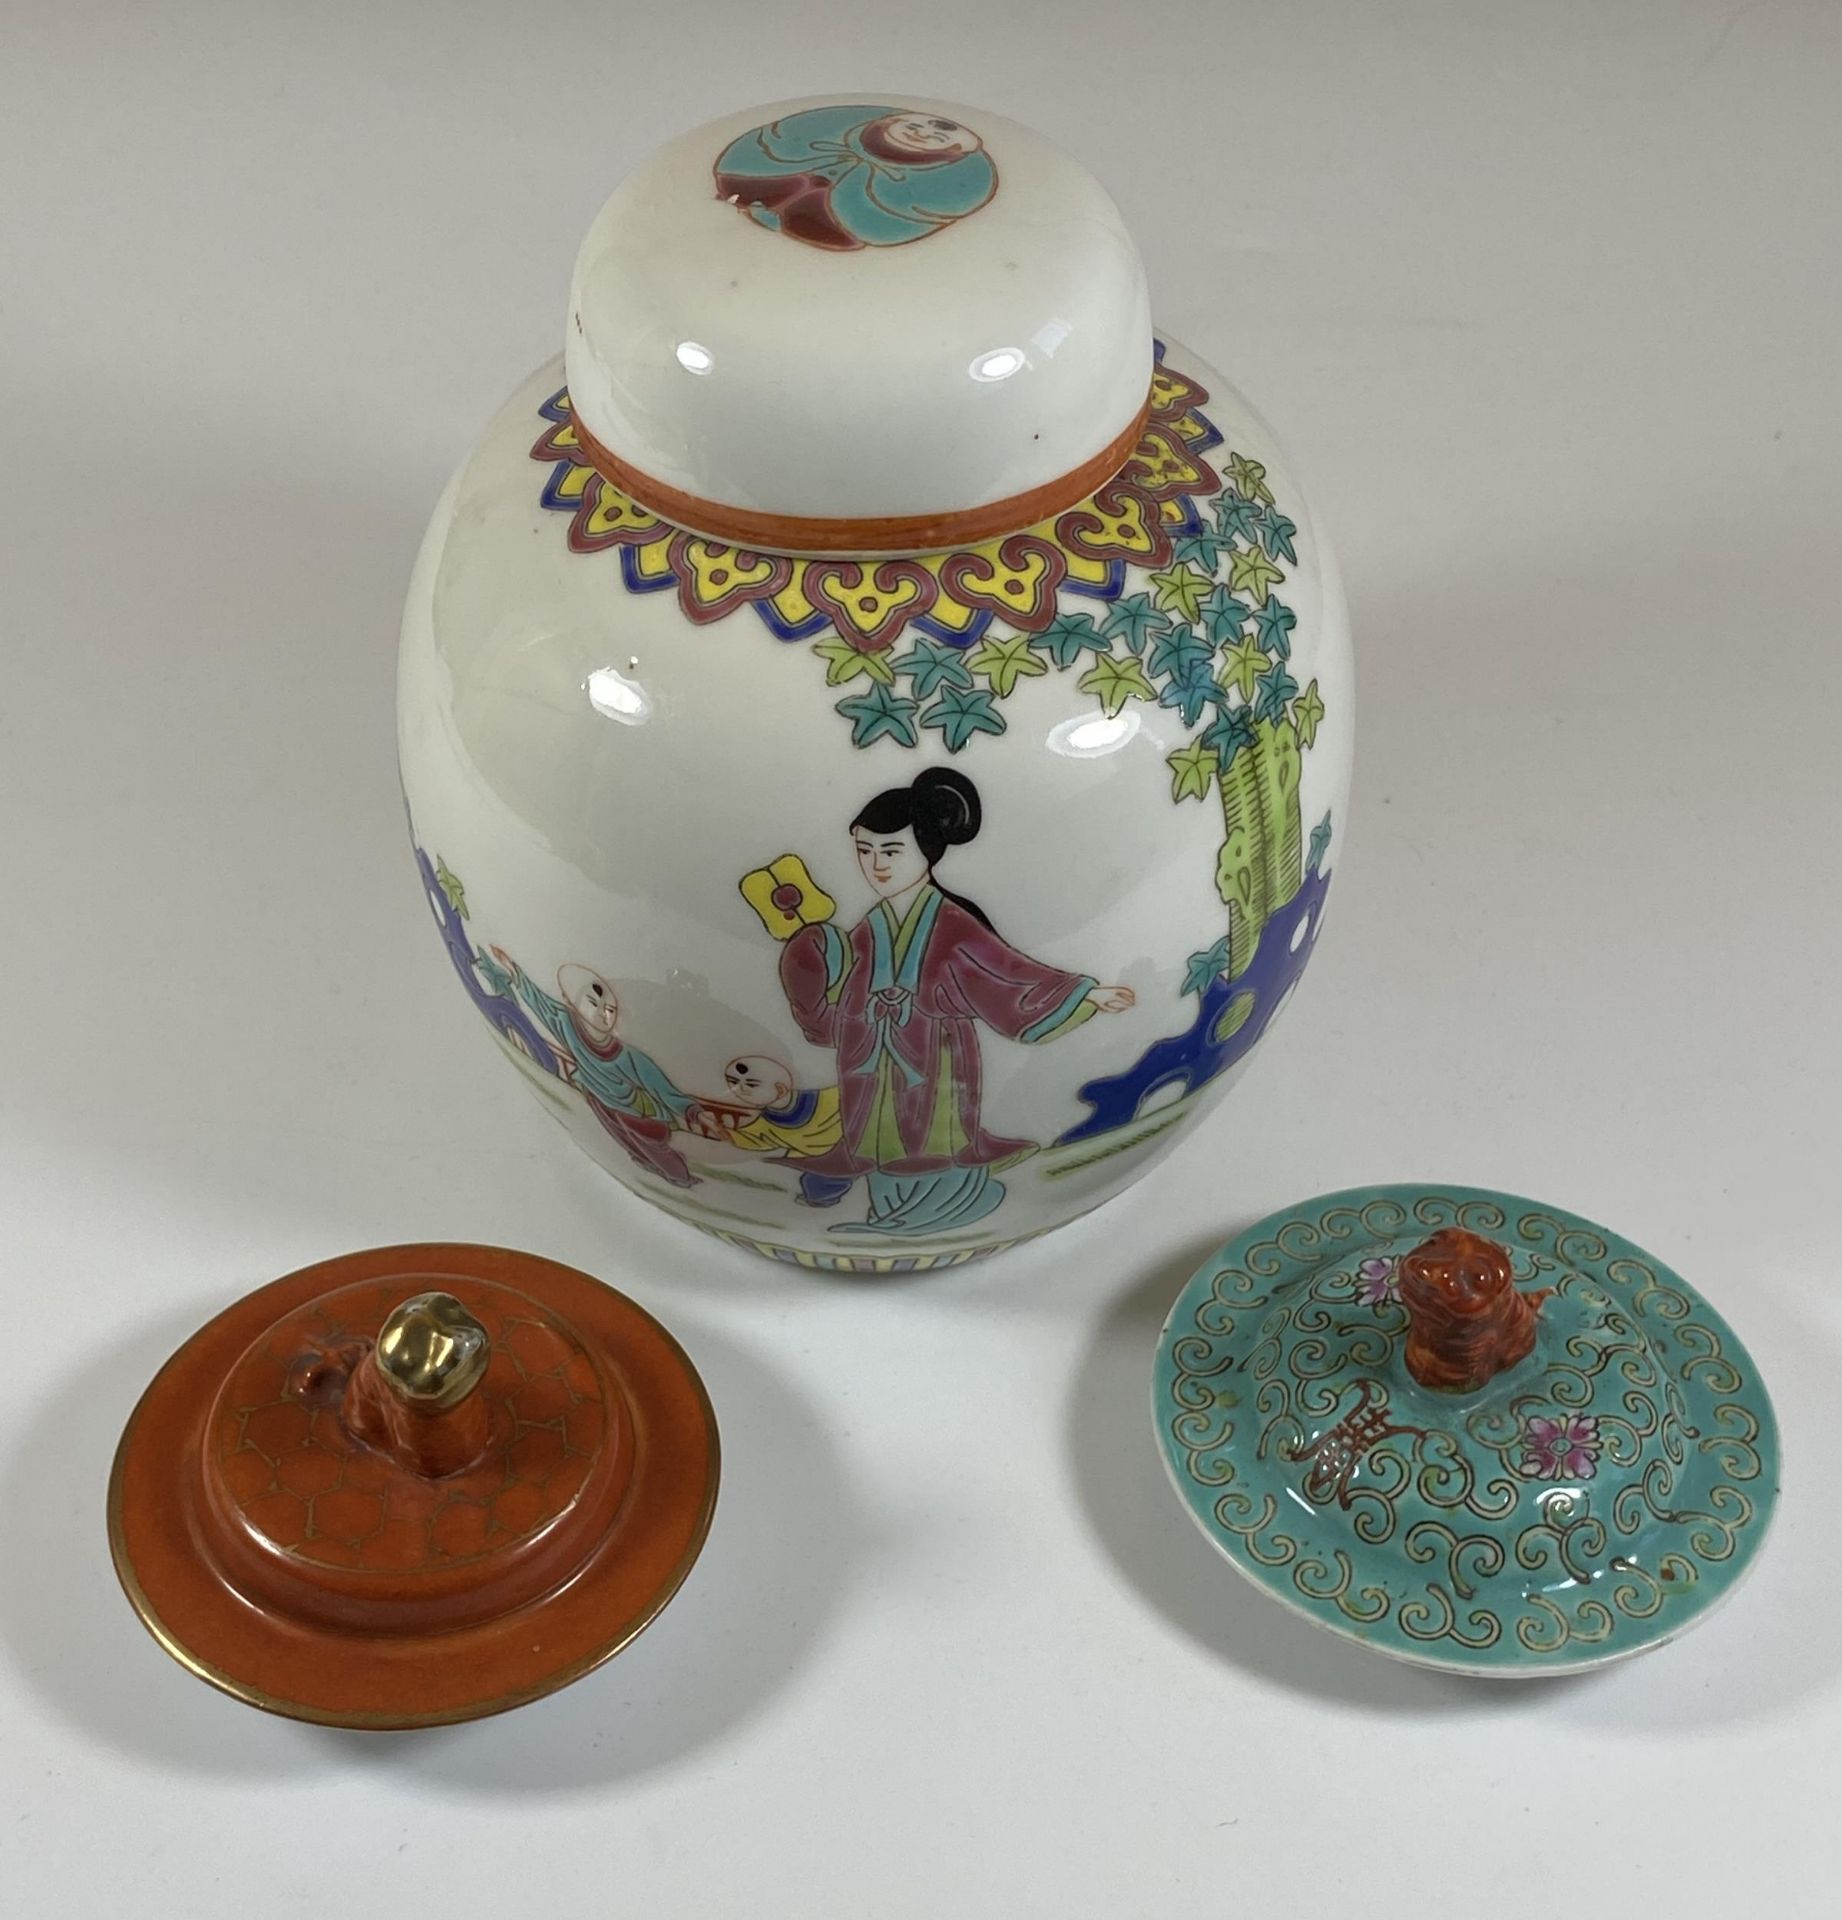 A GROUP OF 1980'S CHINESE CERAMICS COMPRISING A LIDDED GINGER JAR WITH ORIGINAL CORK STOPPER AND TWO